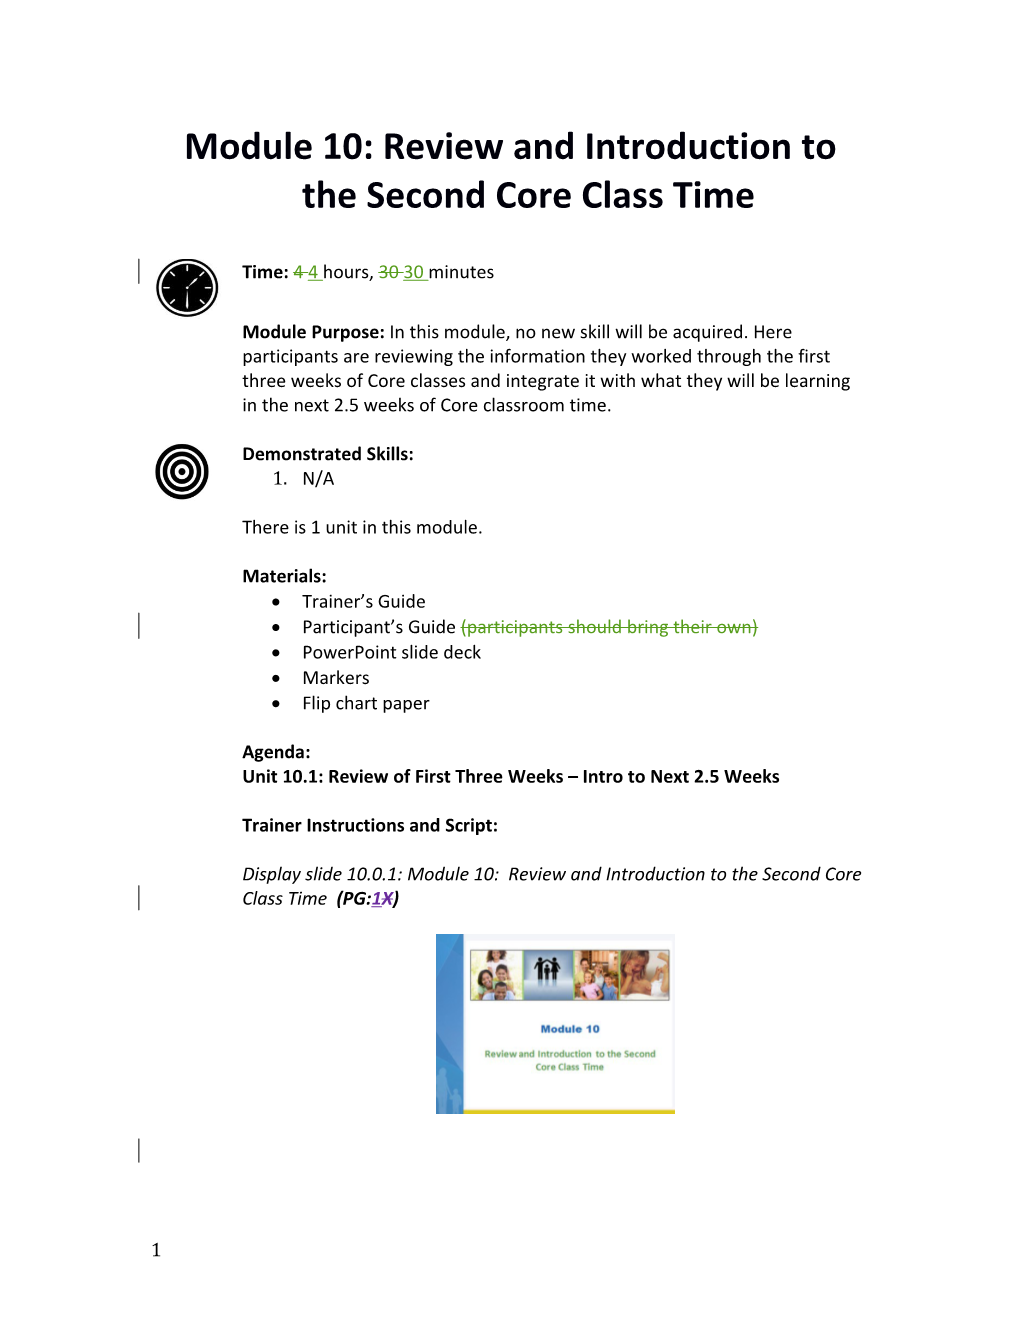 Module 10: Review and Introduction to the Second Core Class Time